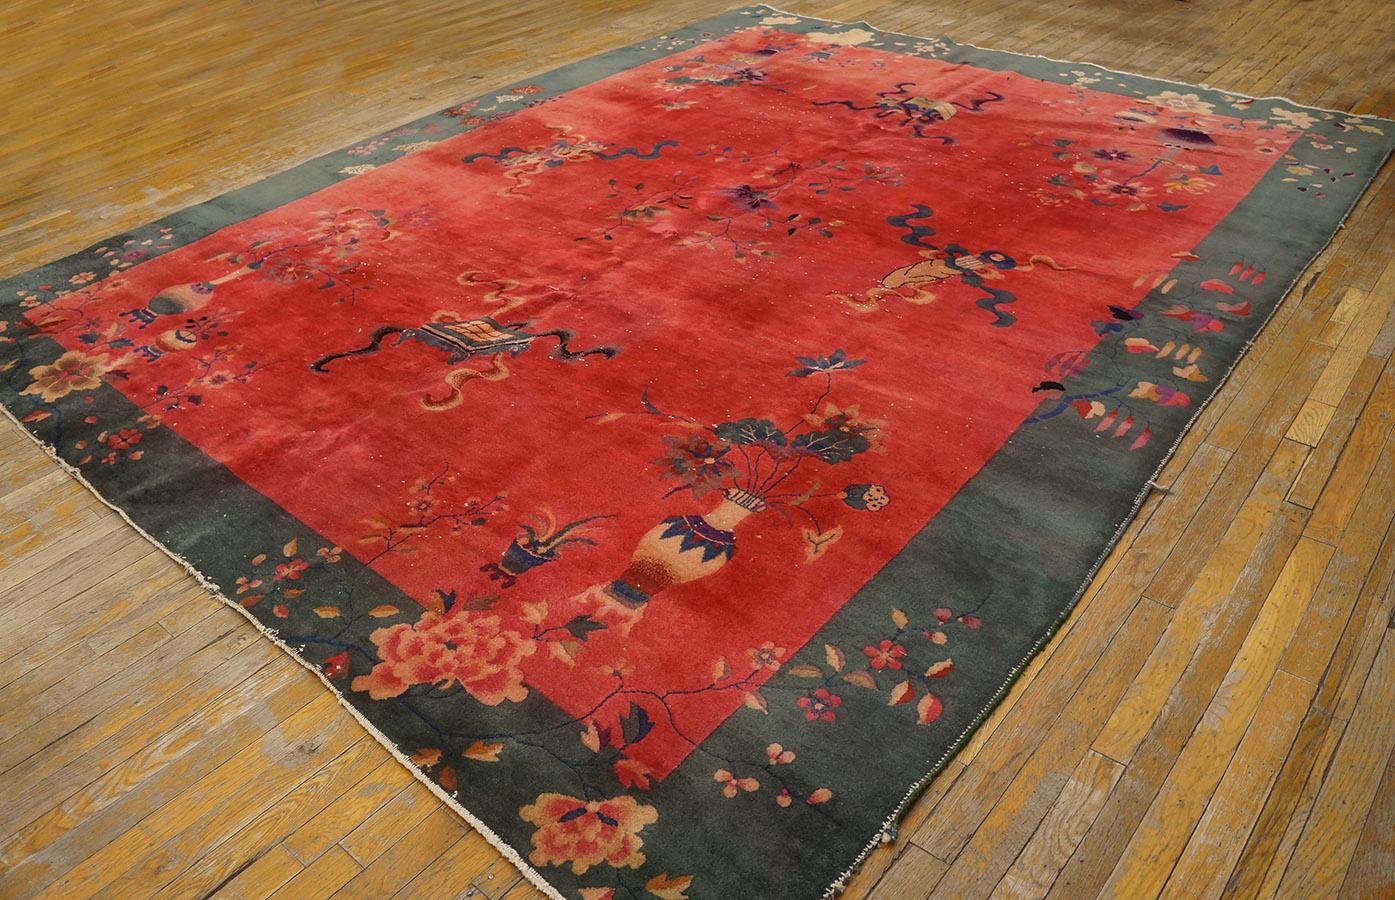 1920s Chinese Art Deco Carpet ( 8' 10'' x 11' 2'' - 270 x 340 cm )  In Good Condition For Sale In New York, NY